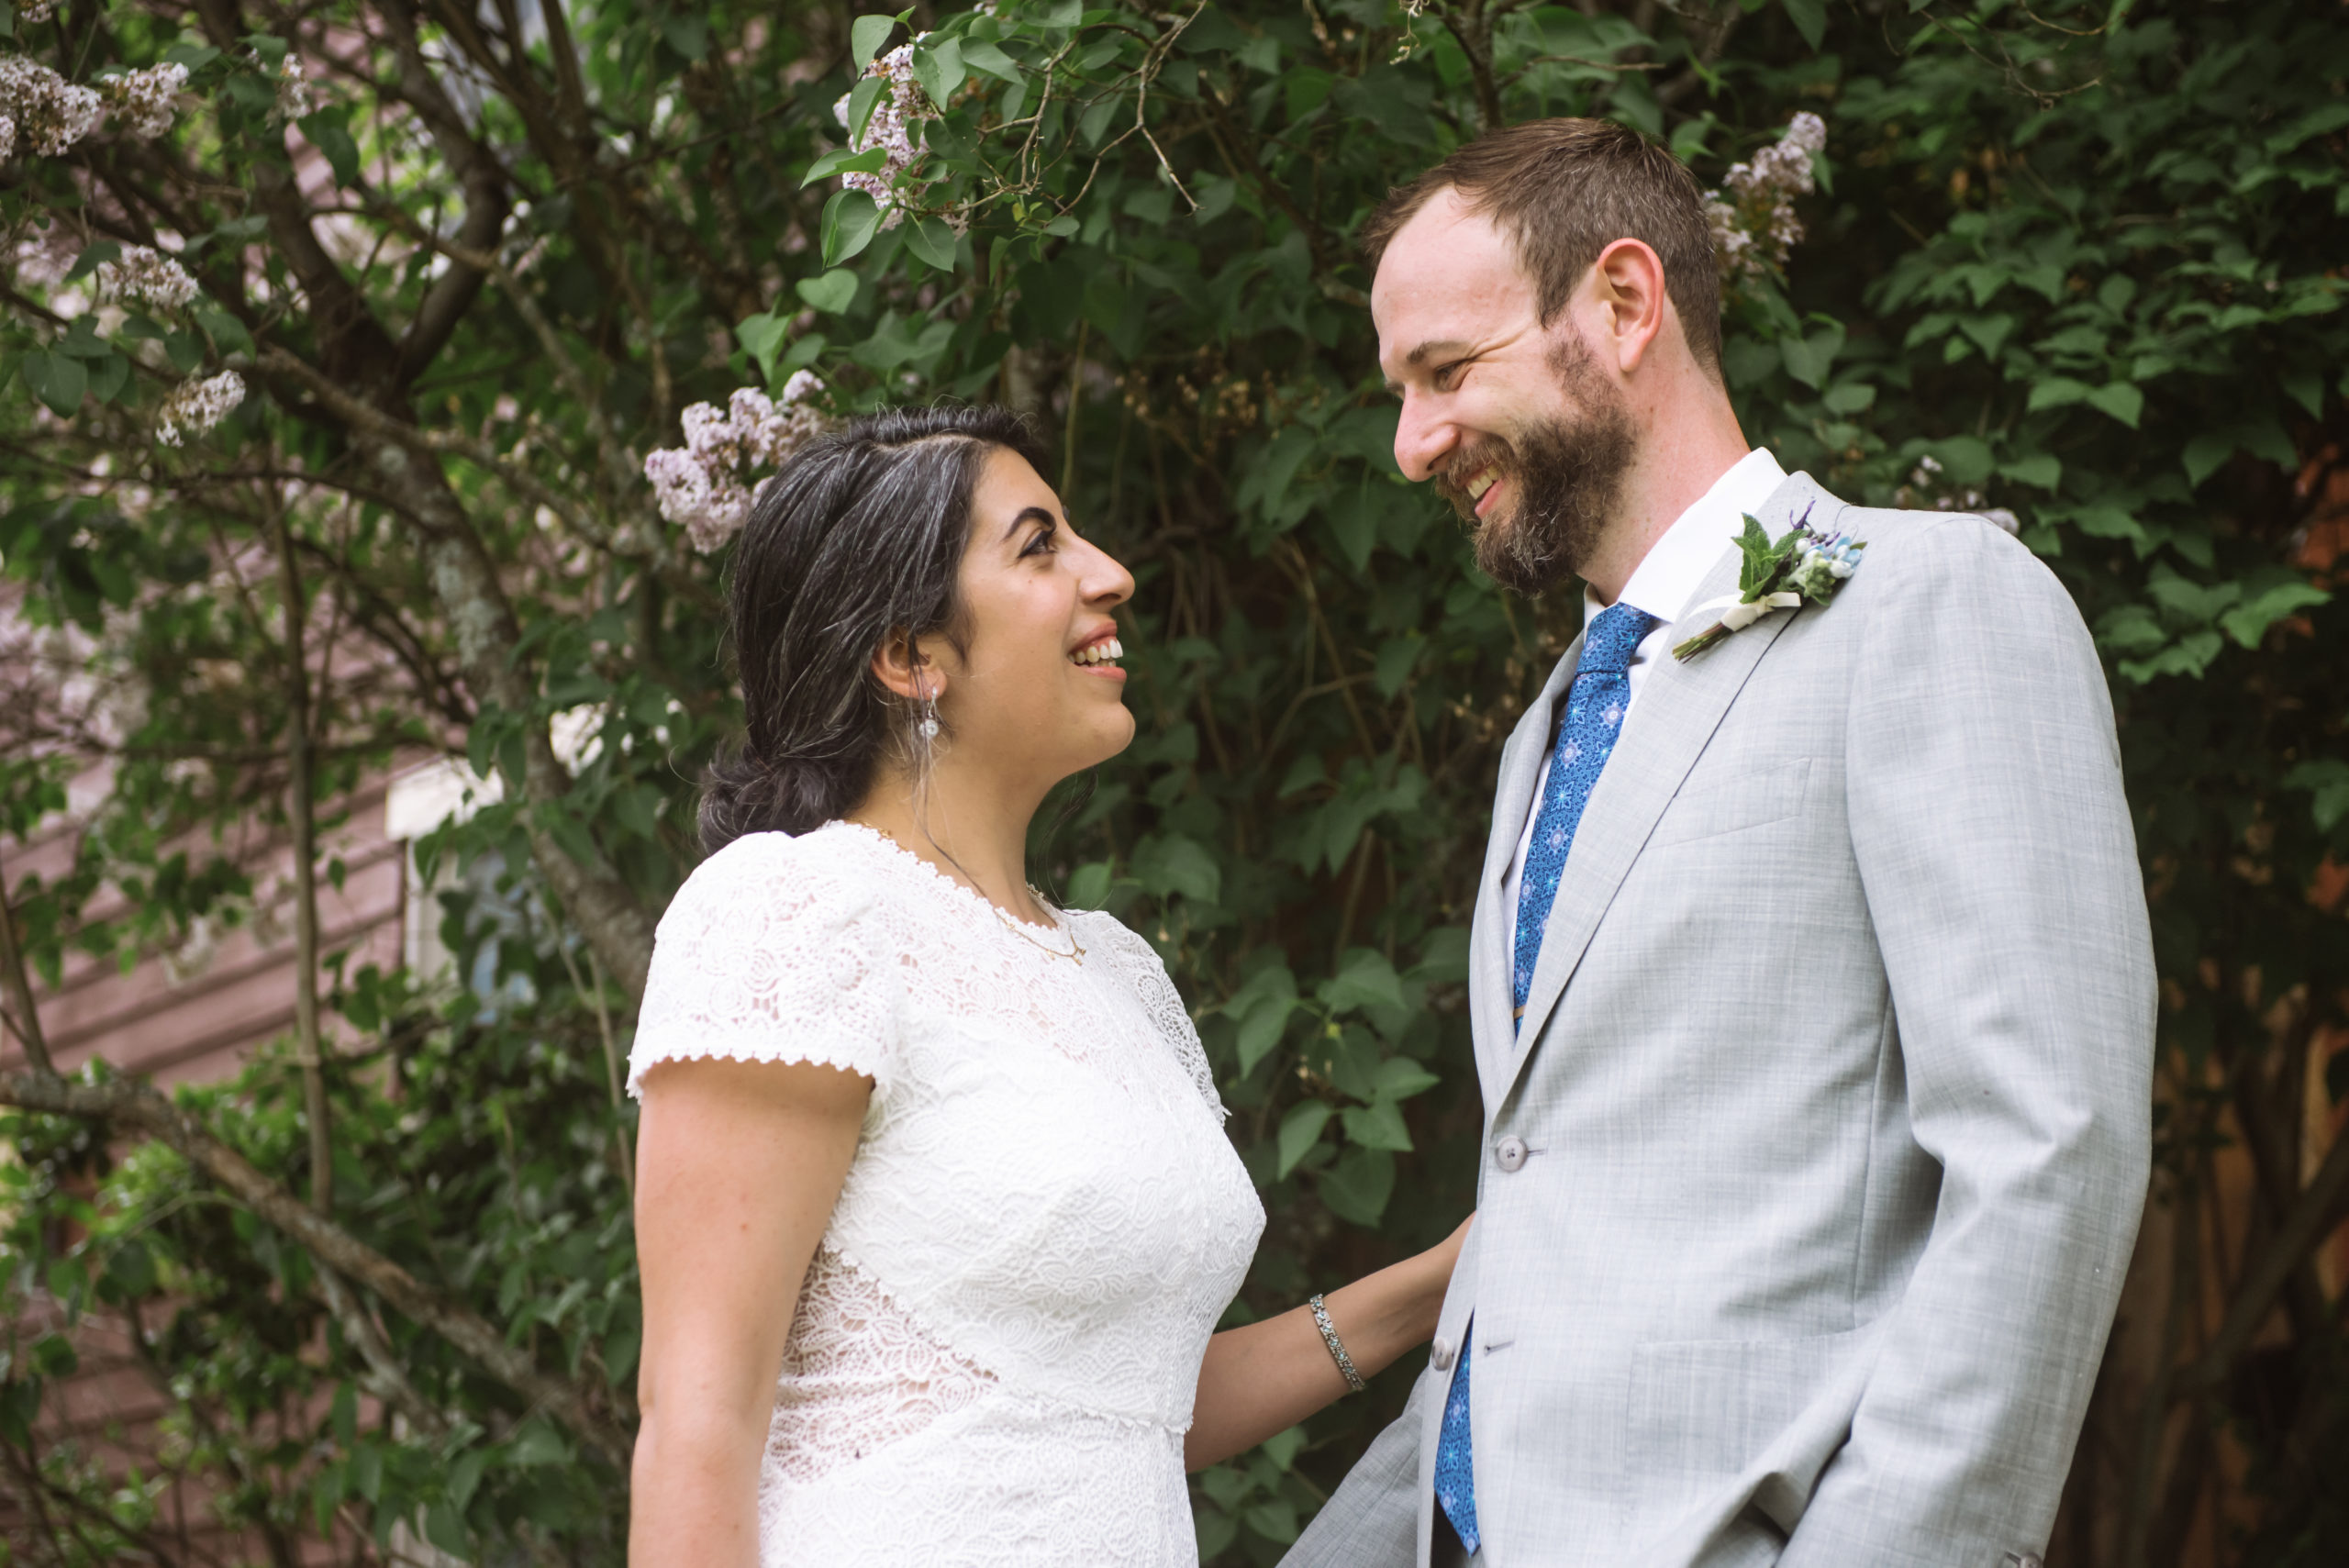 Bride and groom smiling at one another. One of each of their hands/arms is touching the other. They are standing in front of a tree with green leaves and white/purple flowers.